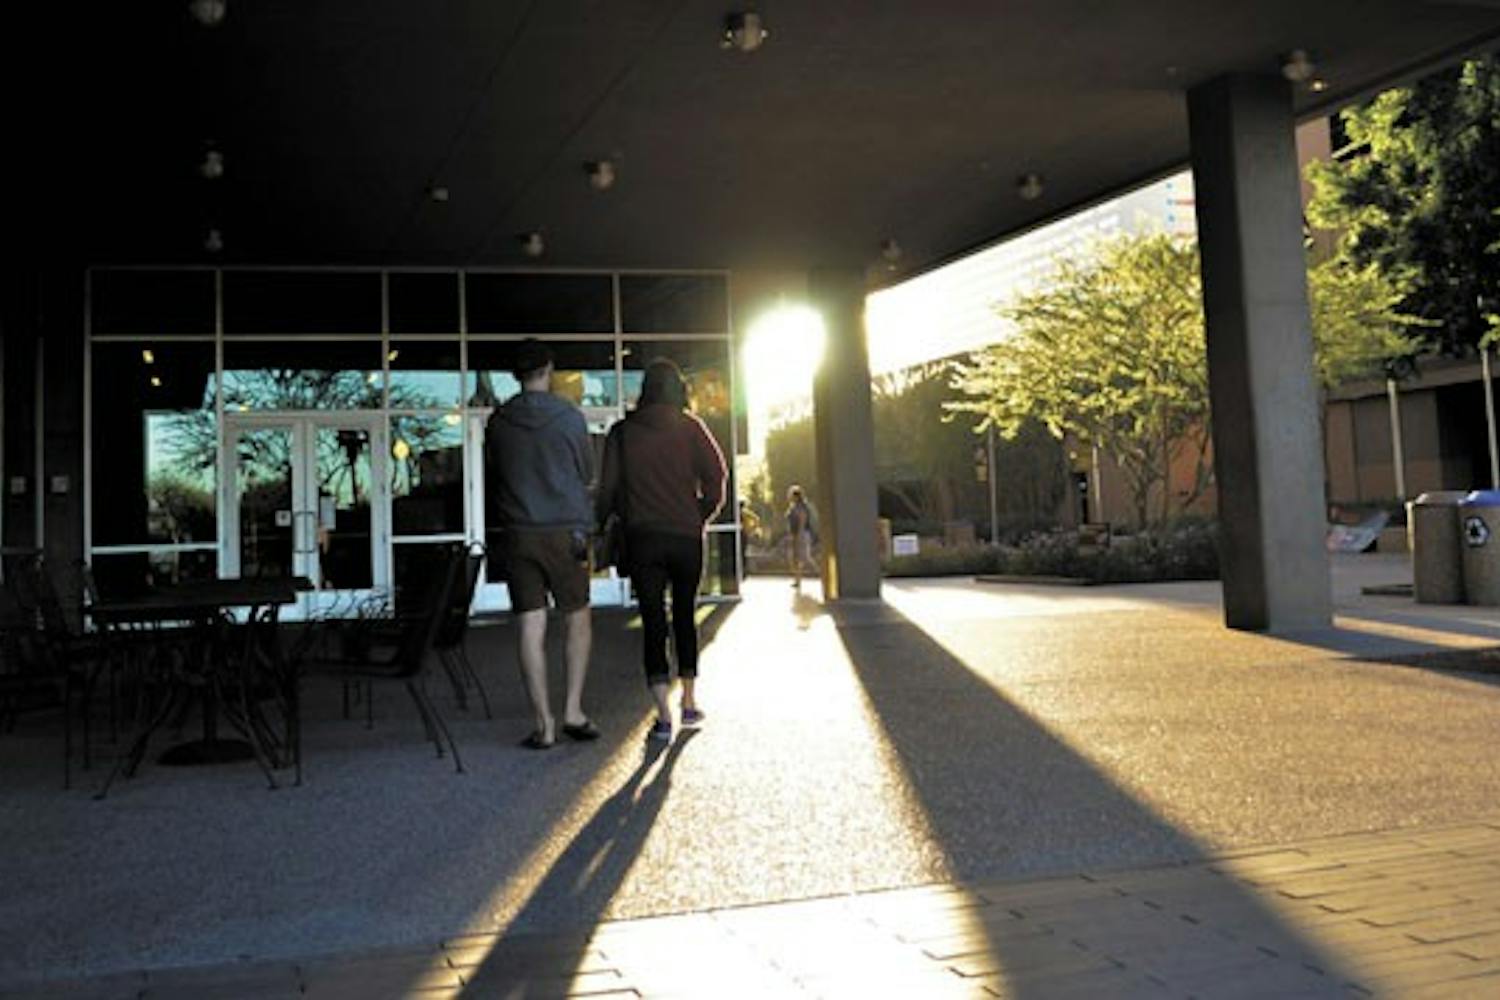 Students meander to their early Monday morning classes at the Walter Cronkite School of Journalism and Mass Communication on the downtown Phoenix campus as the sun begins to rise. (Photo by Danielle Gregory)